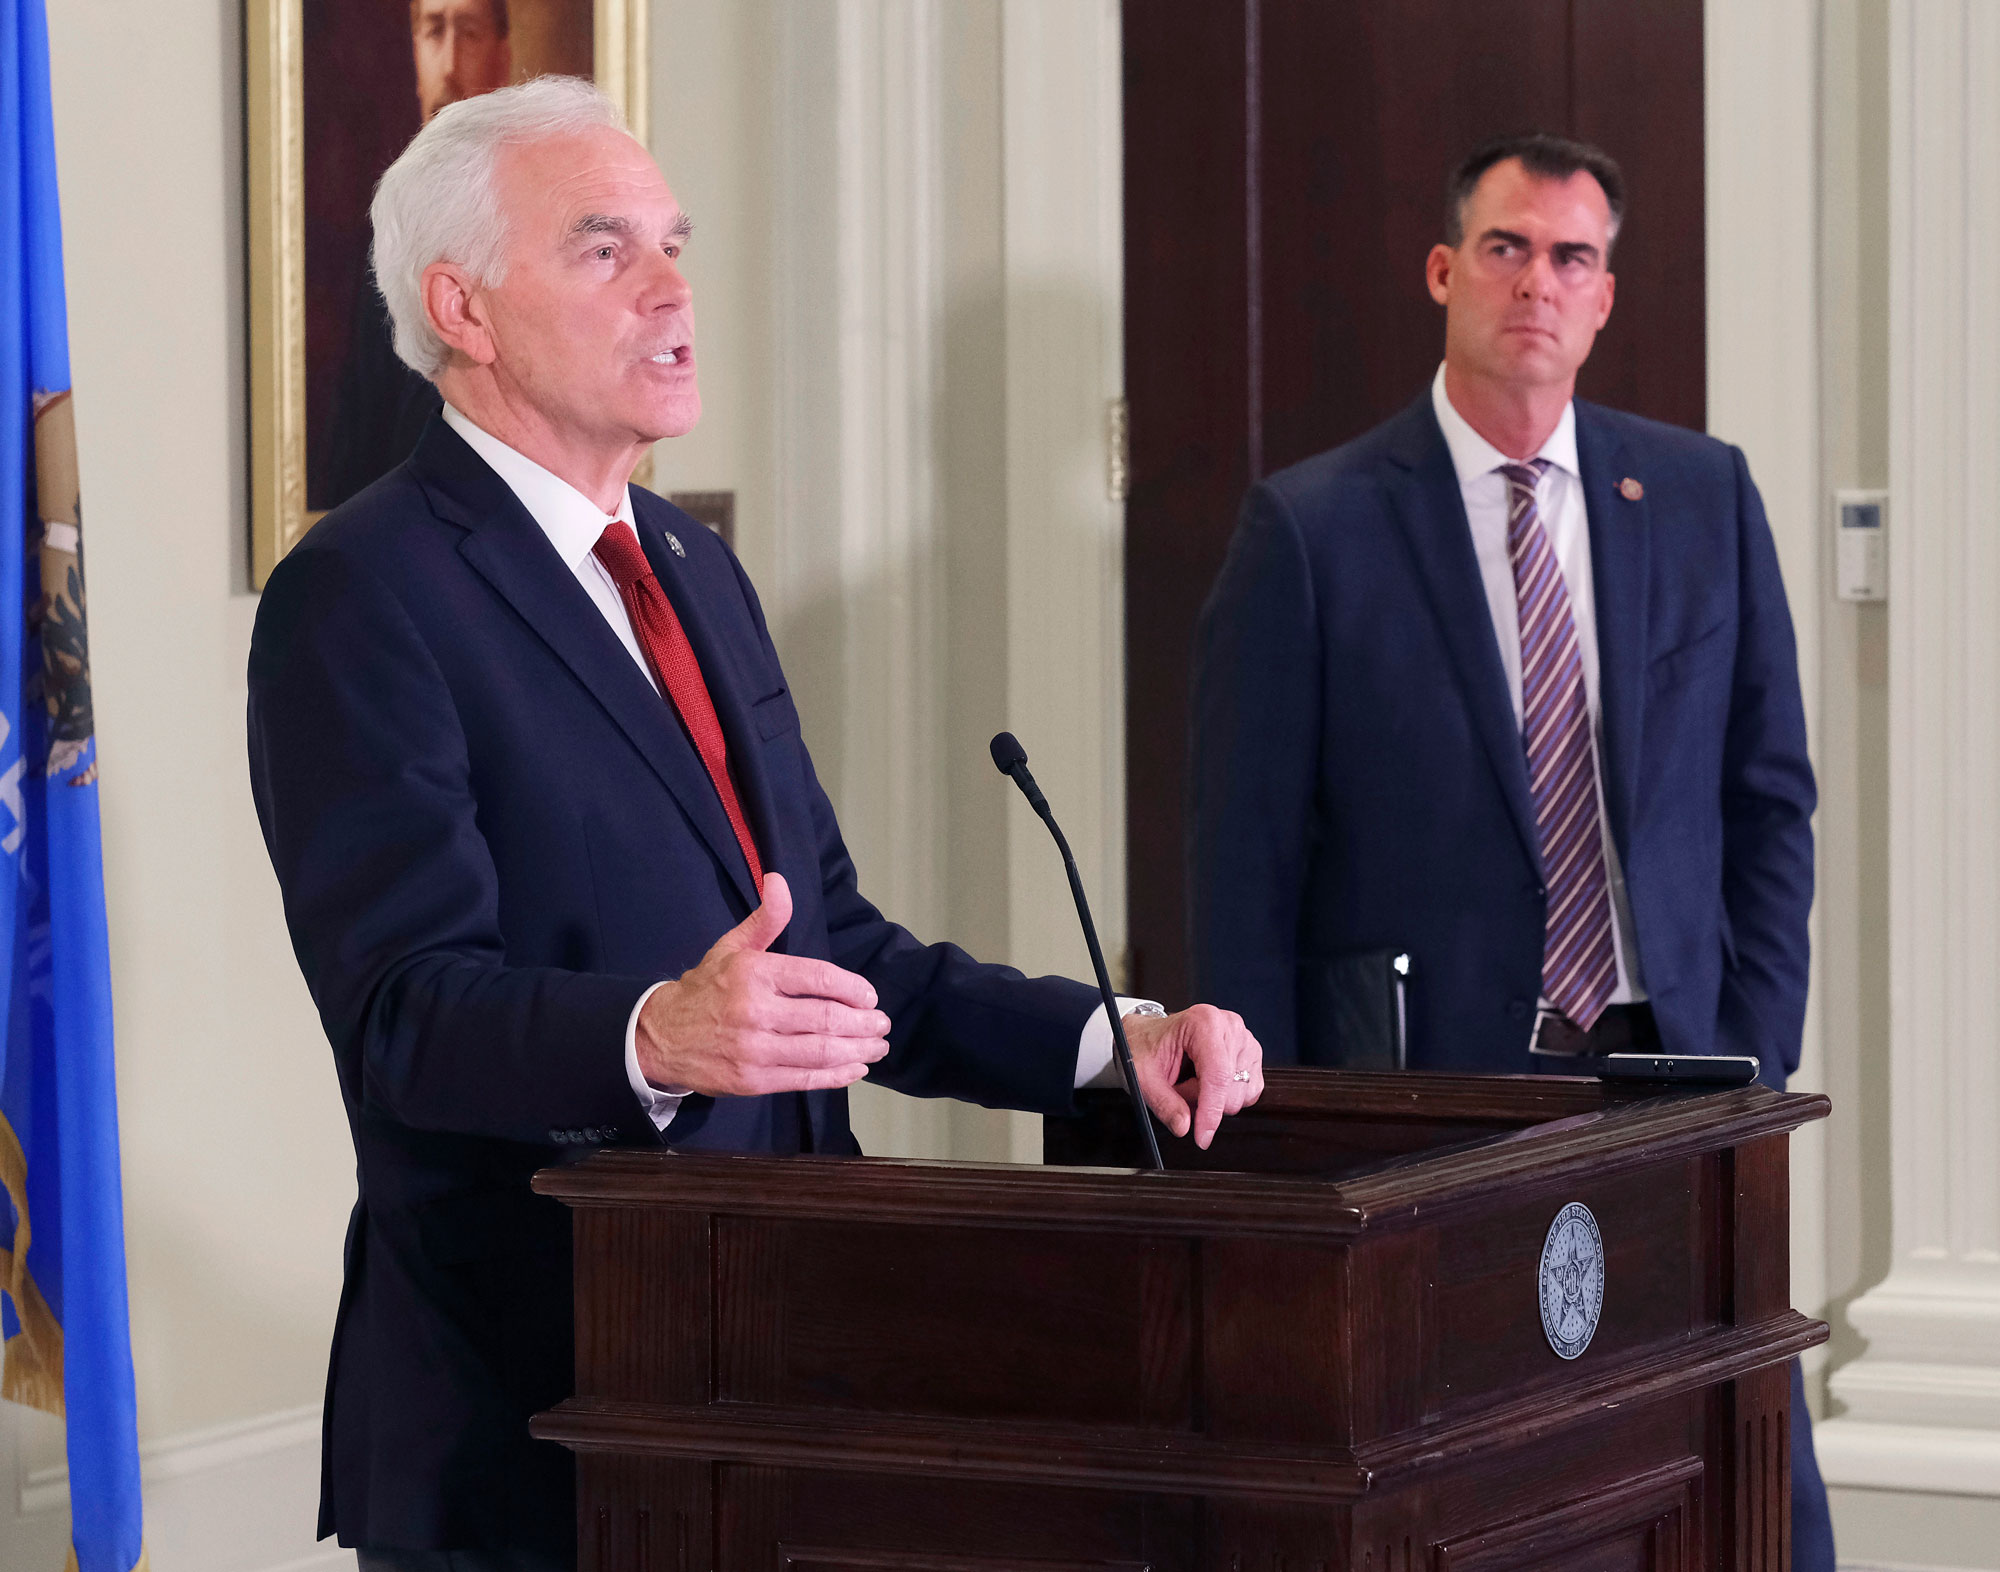 Oklahoma Attorney General John O'Connor, left, speaks as Governor Kevin Stitt looks on during a press conference at the Capitol in Oklahoma City, on Friday.